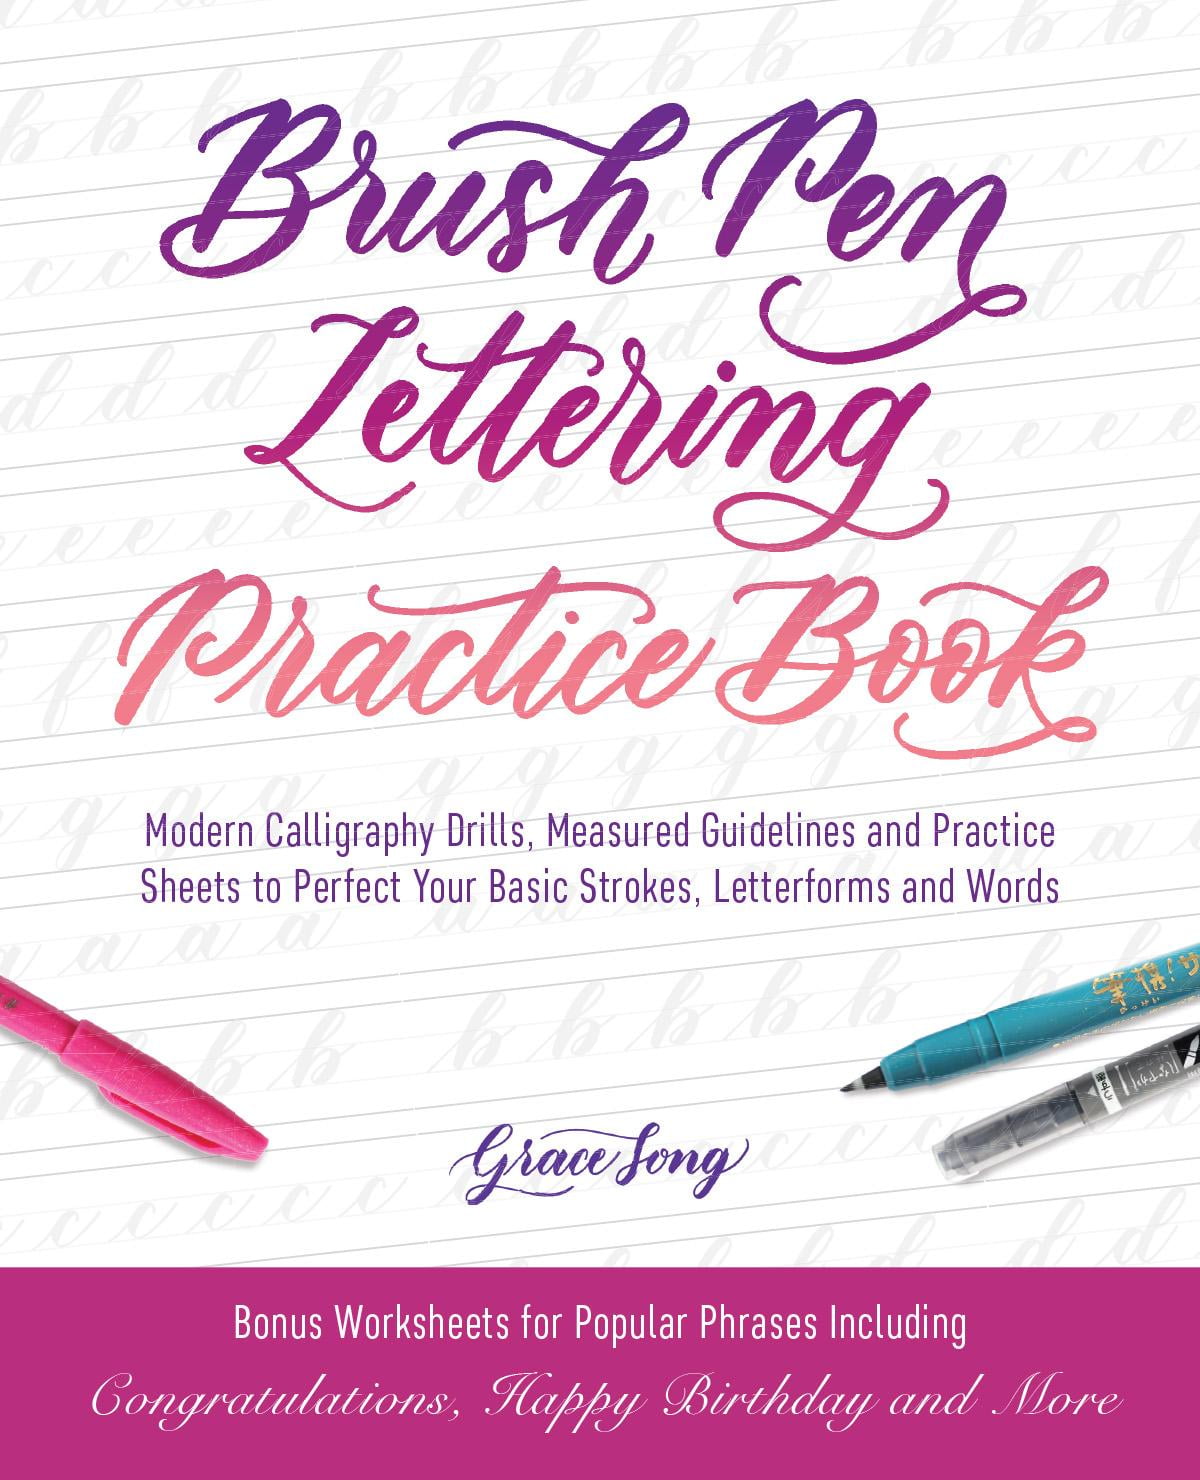 Brush-Pen-Lettering-Practice-Book-Modern-Calligraphy-Drills-Measured-Guidelines-and-Practice-Sheets-to-Perfect-Your-Basic-Strokes-Letterforms-and-Words